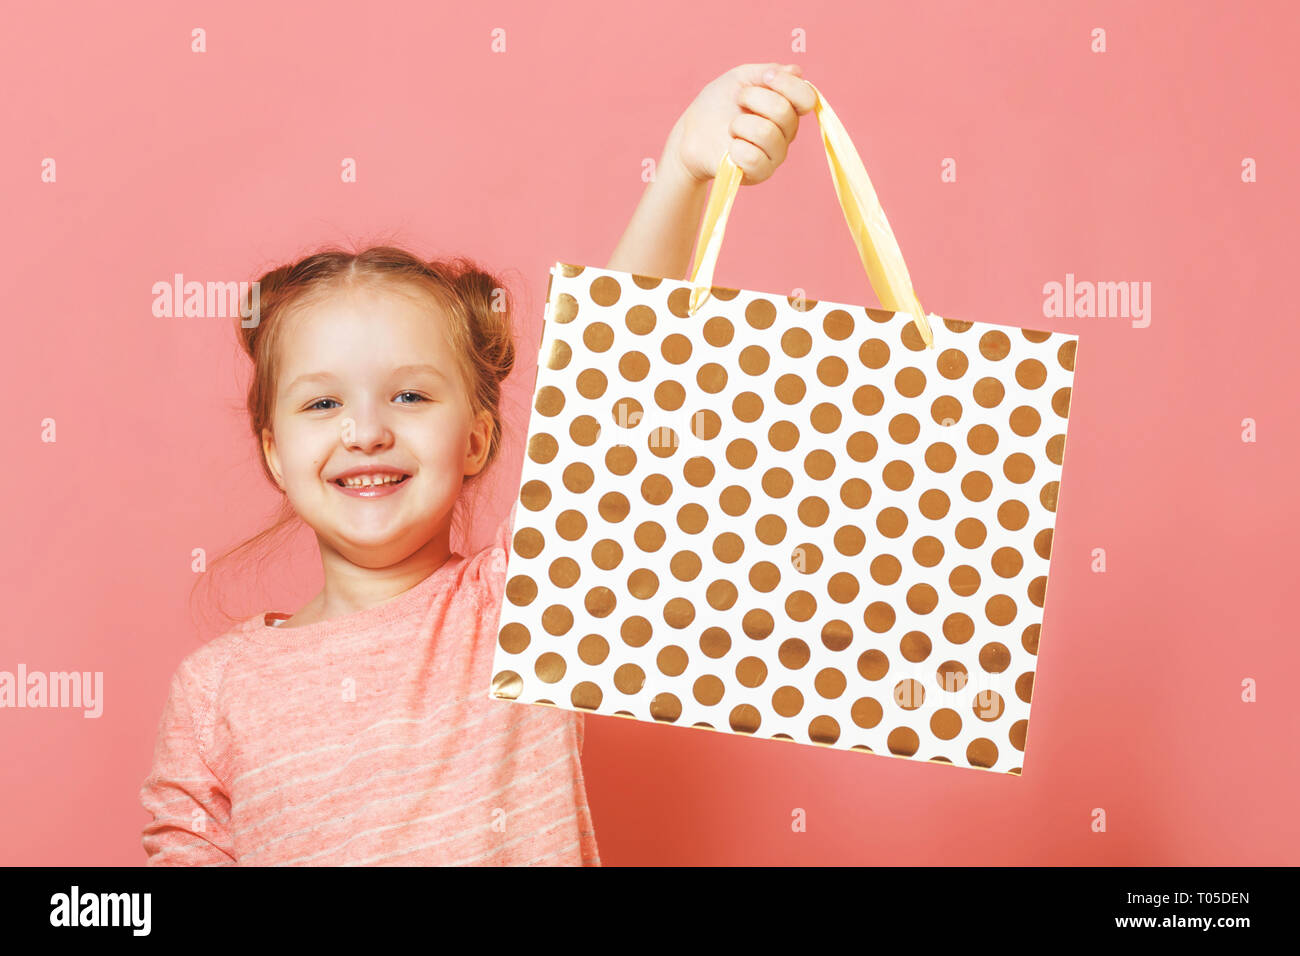 Closeup portrait of a cute little girl with hair buns over pink background. The child lifted the paper bag high, rejoicing at the shopping or gift. Stock Photo